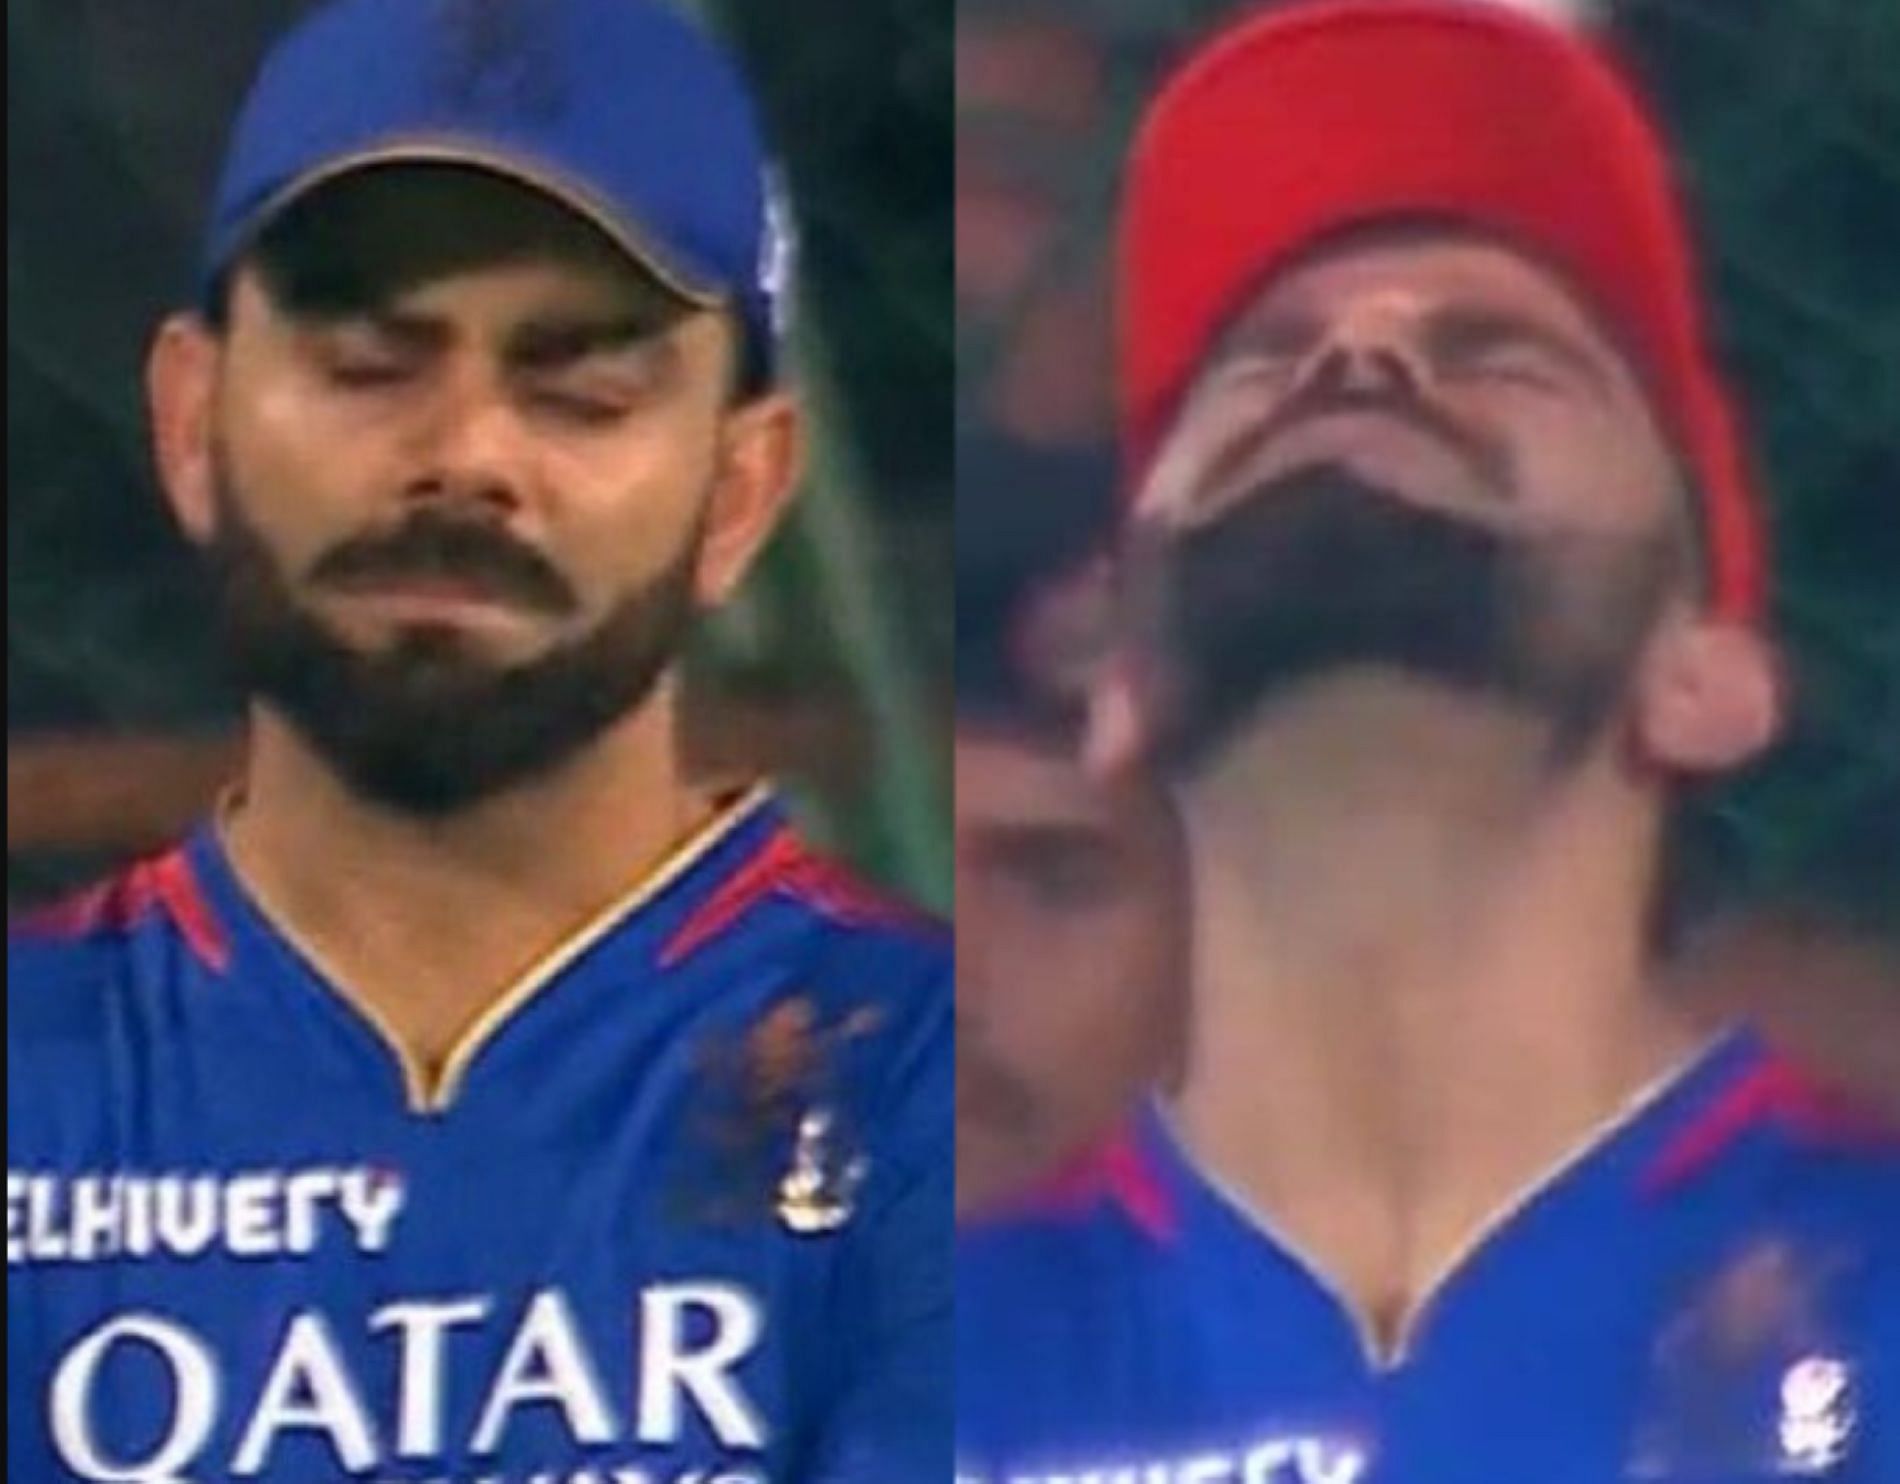 A dejected Virat Kohli could only watch as the RCB bowlers were smashed to all parts of the Chinnaswamy Stadium[Credit: Sportskeeda Twitter handle]